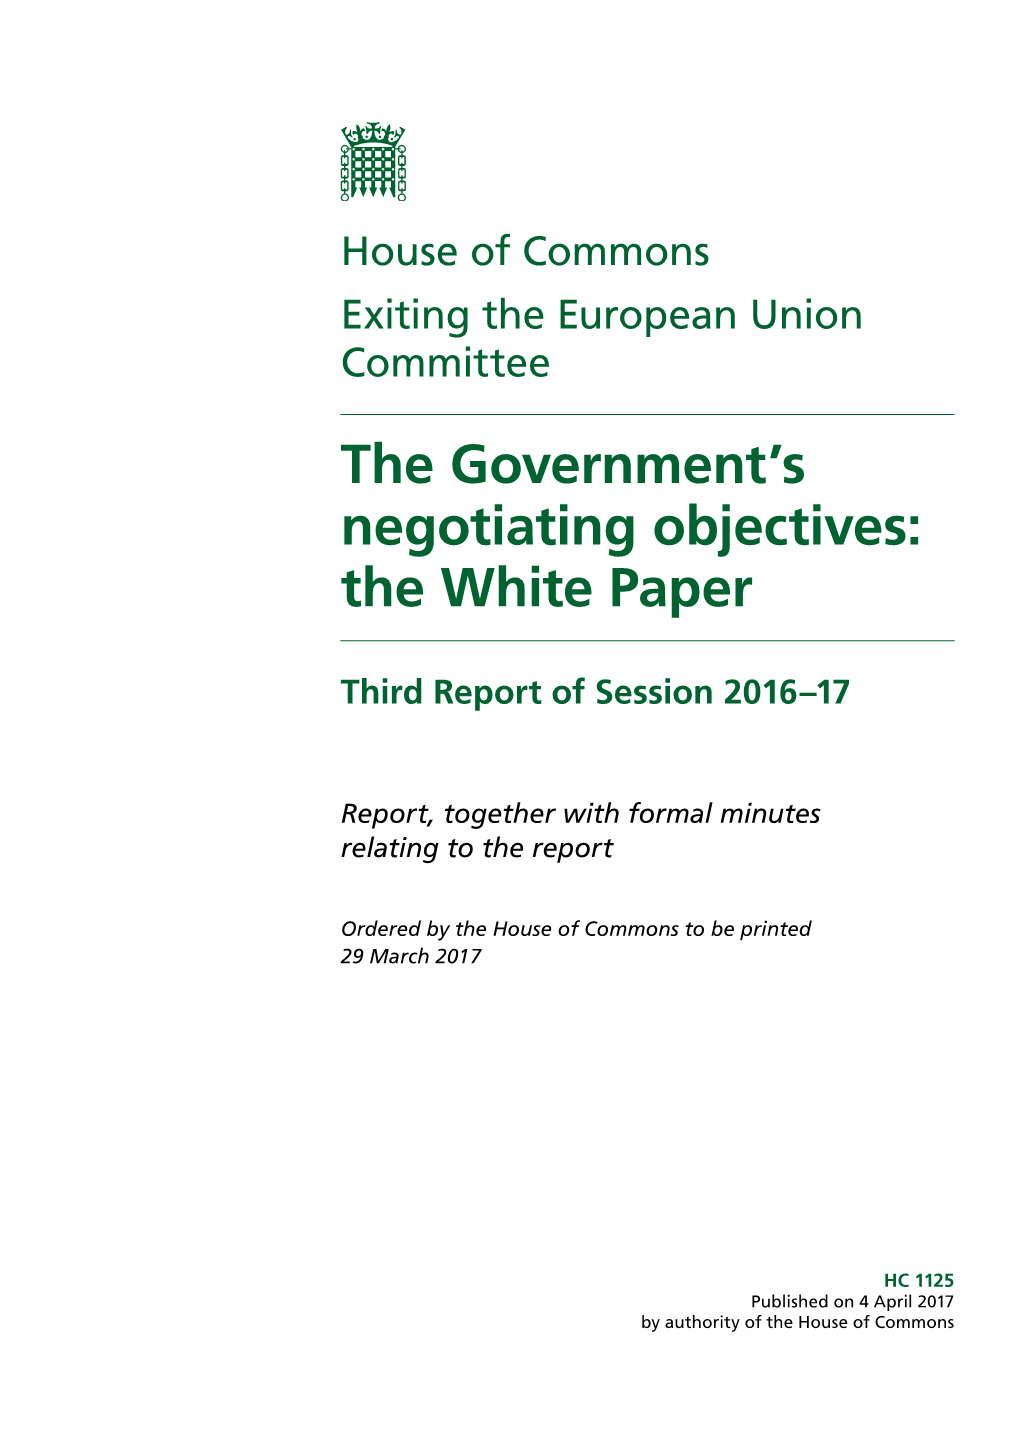 The Government's Negotiating Objectives: the White Paper